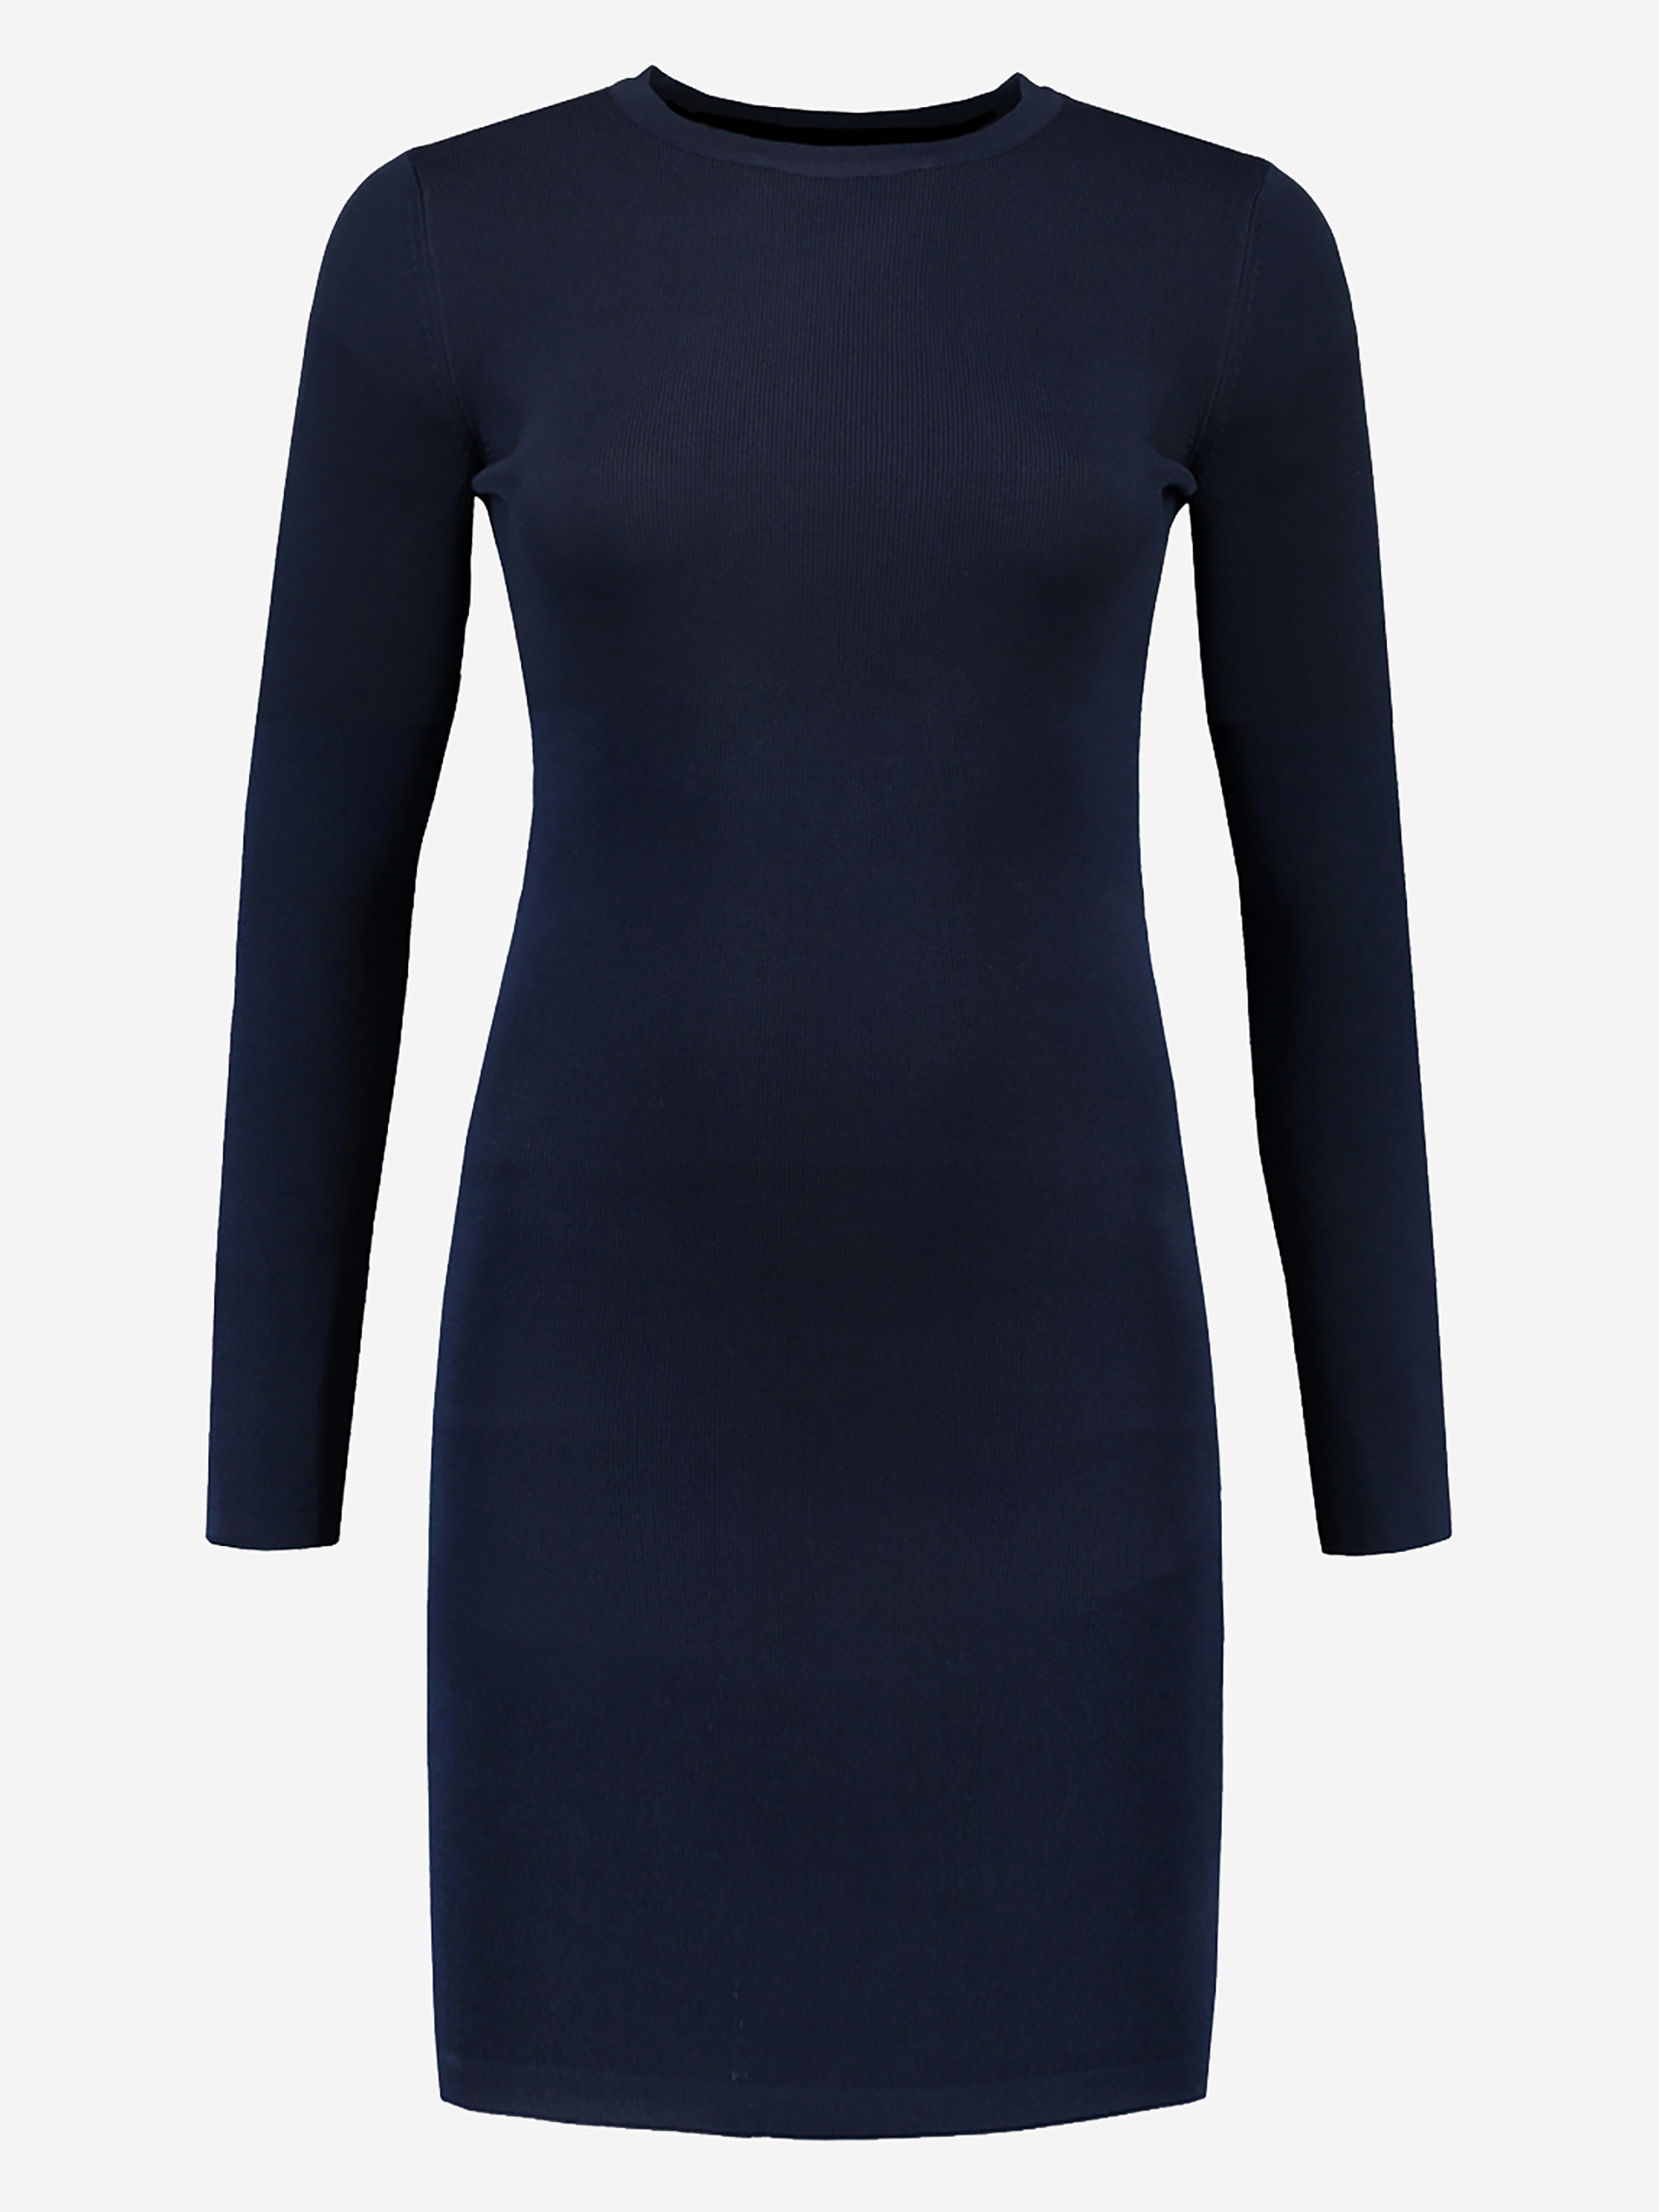 Navy fitted dress